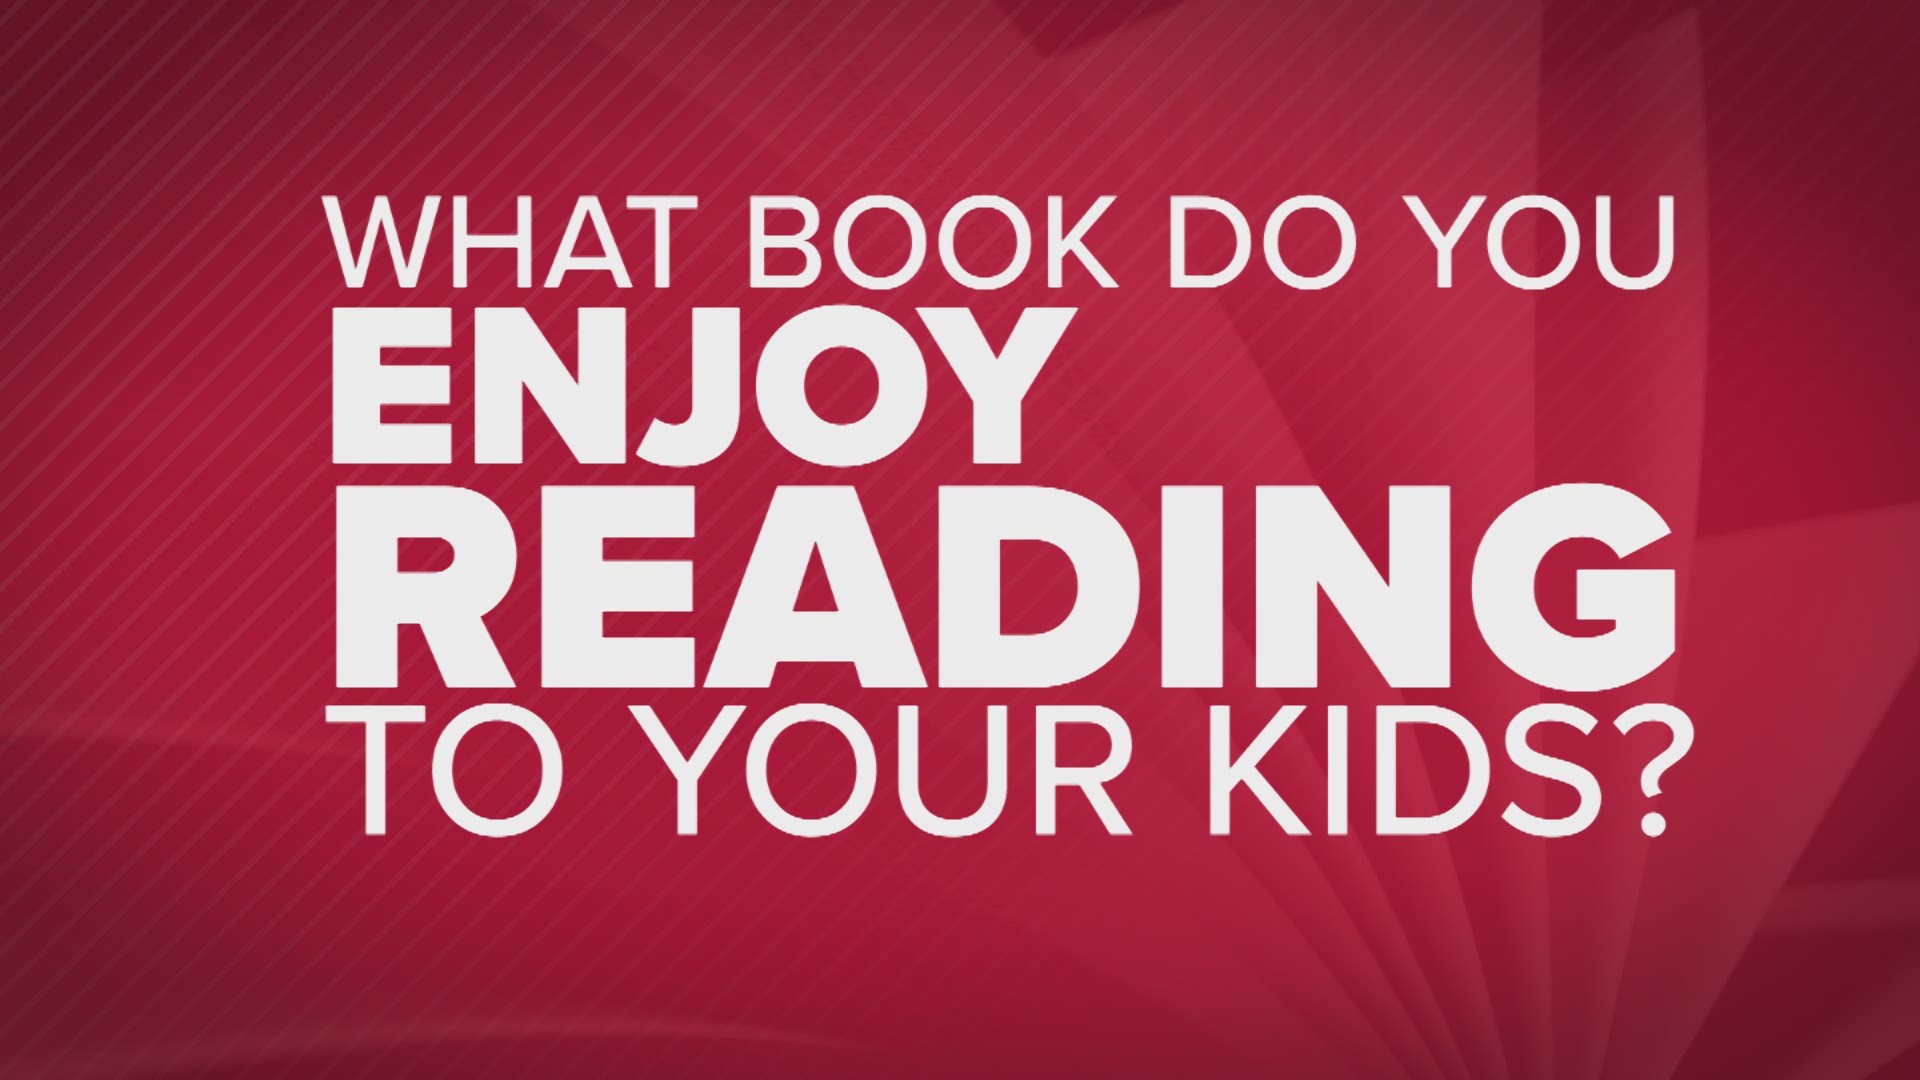 As part of KHOU 11’s Turn the Page Literacy Initiative, our team members share their favorite childhood books and why they believe reading is so important for children.